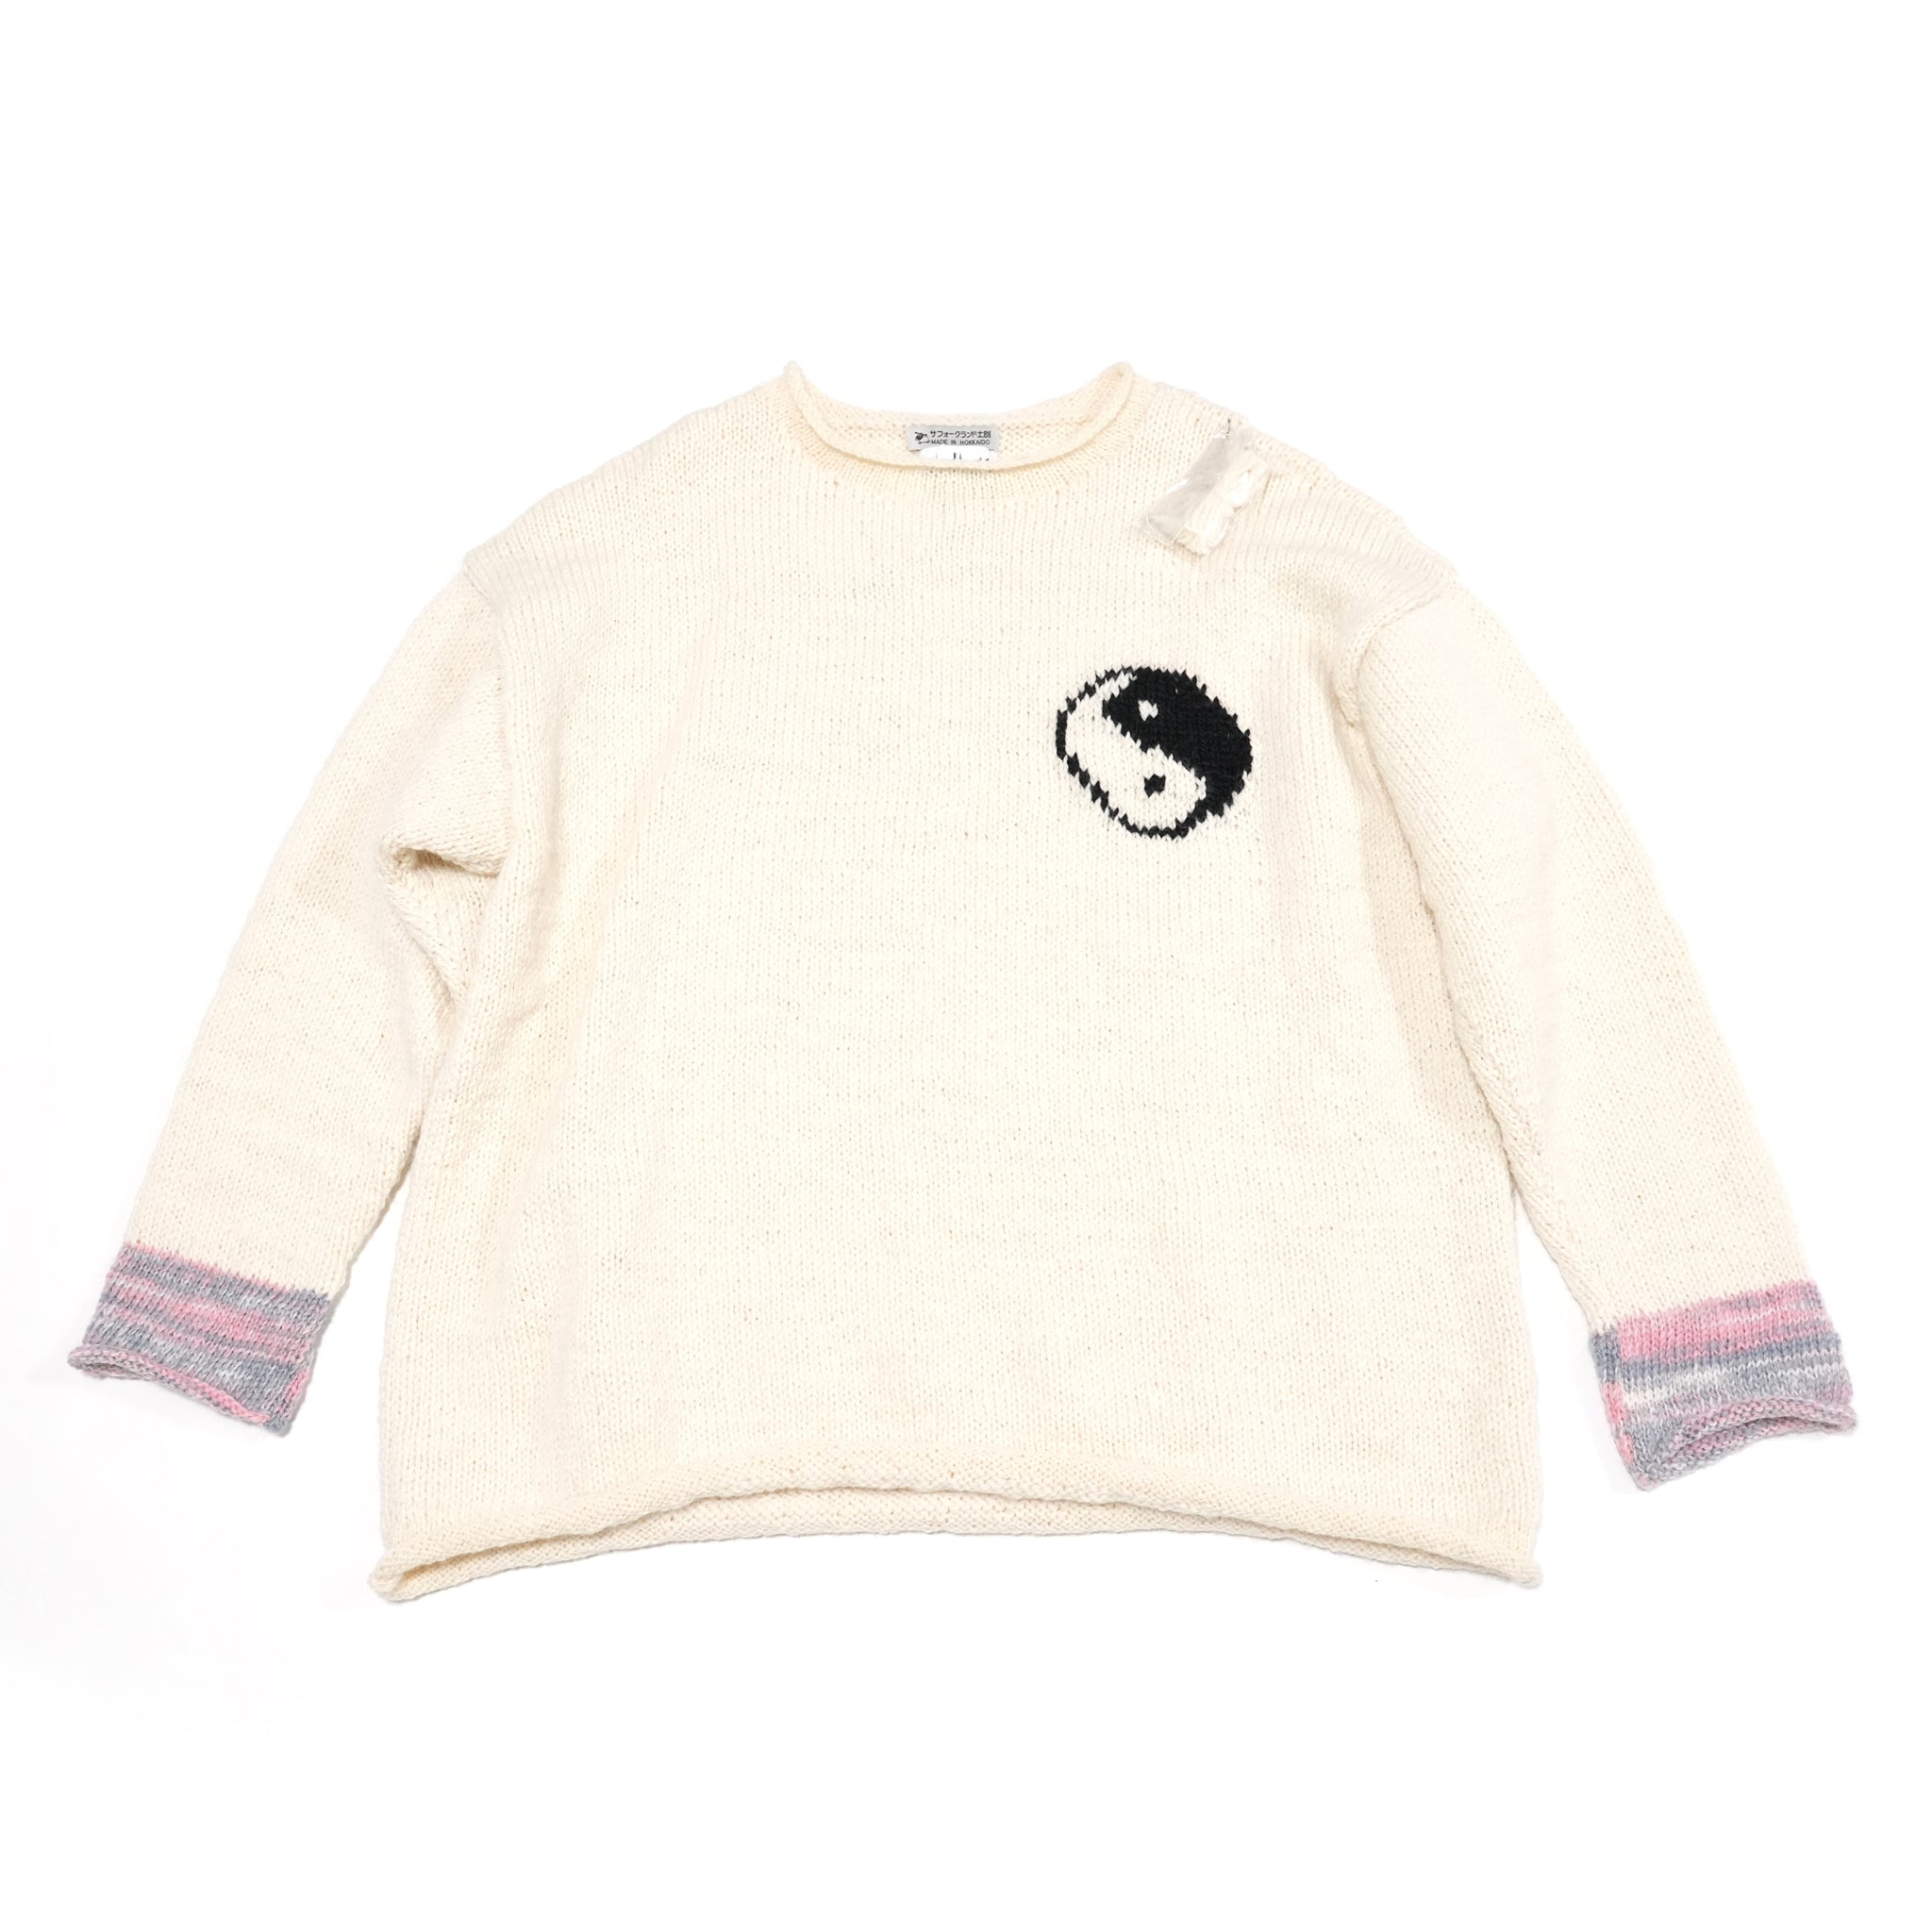 Name: Yin-Yang Hand Knit (NATURAL) | Color: Natural | Size: One Size 【CITYLIGHTS PRODUCTS_シティライツプロダクツ】